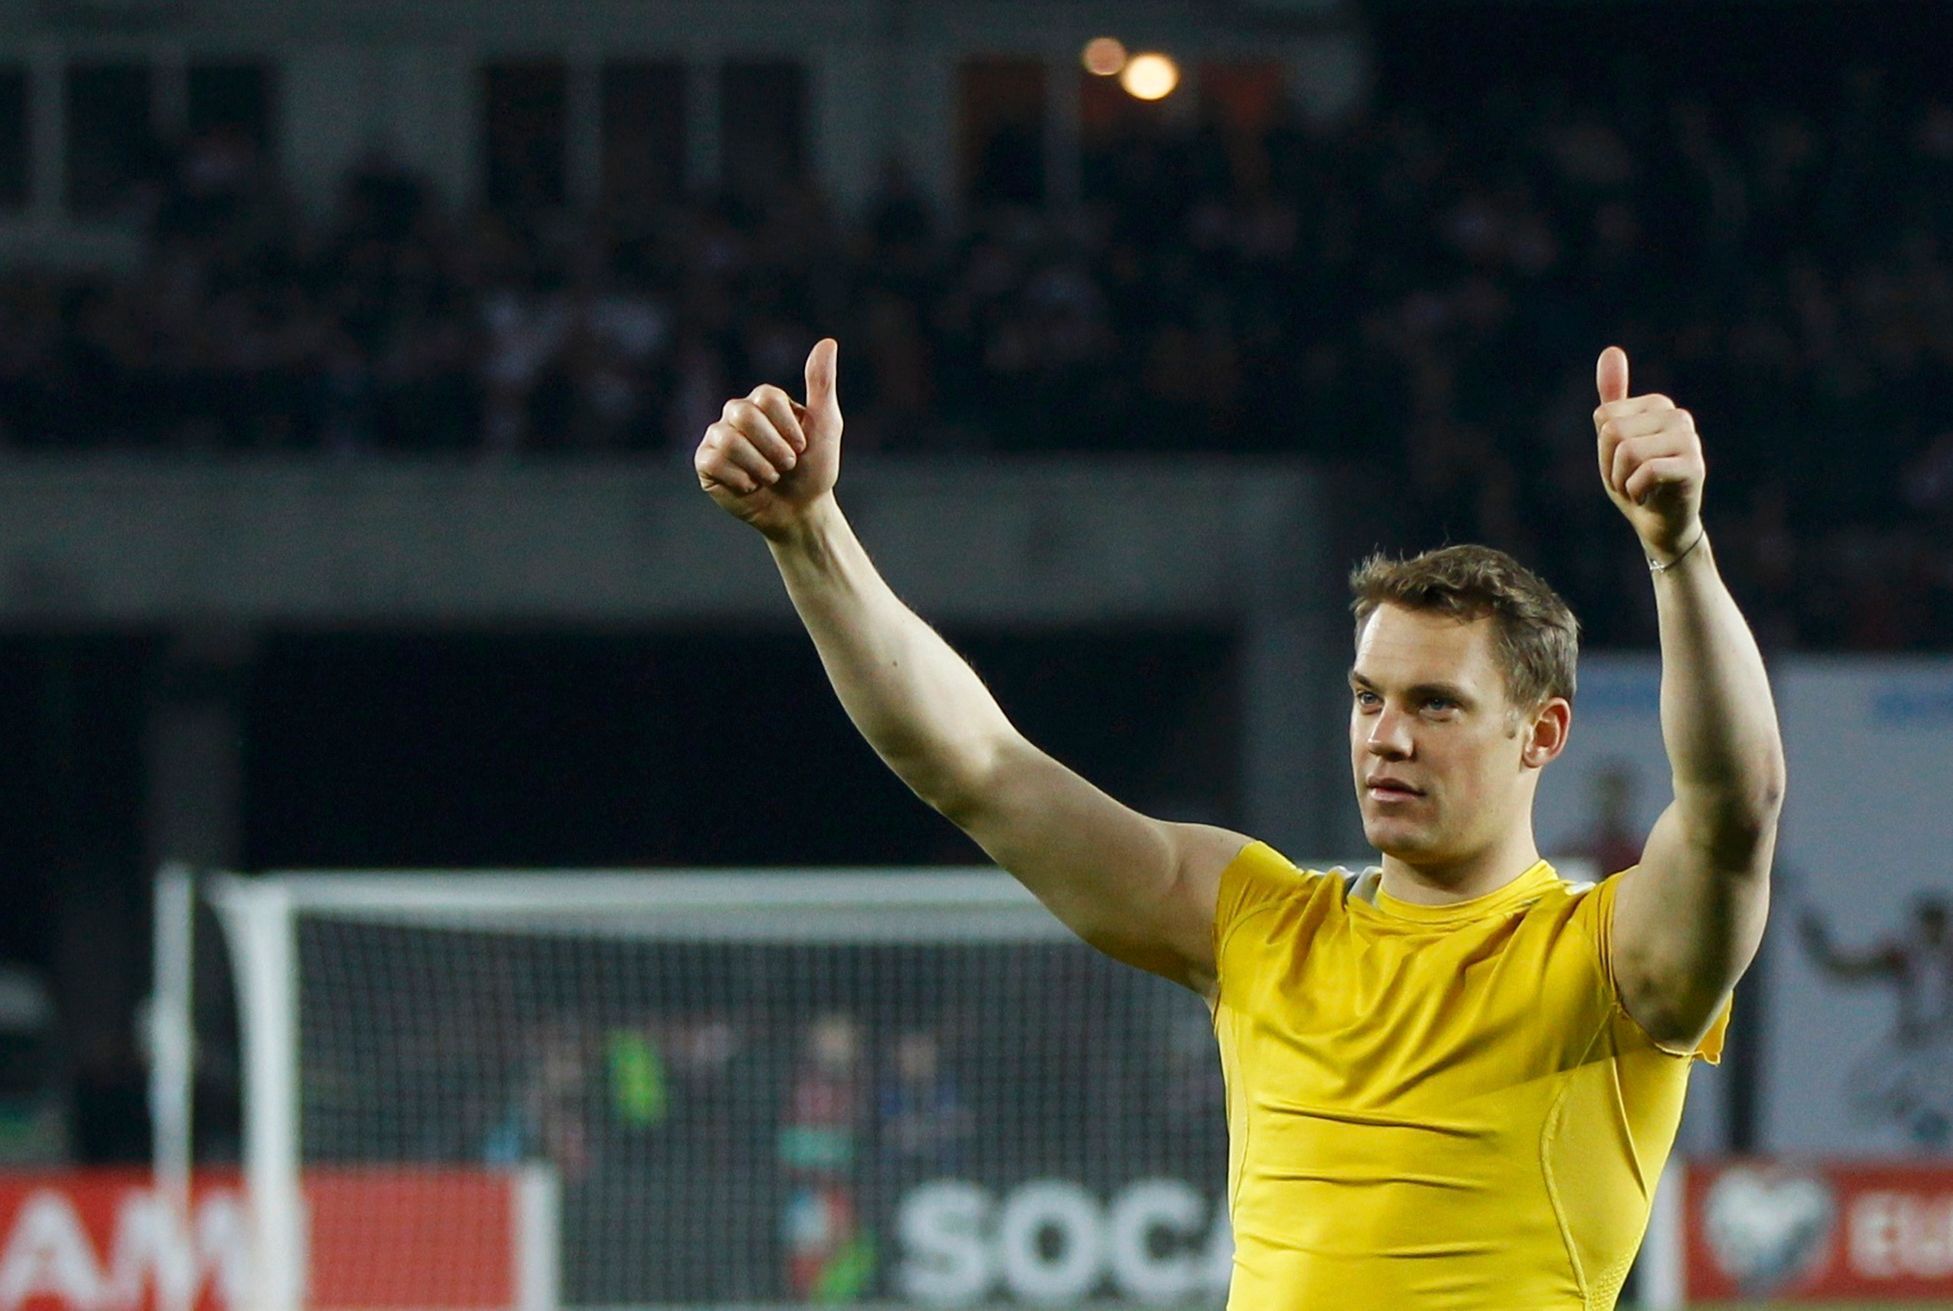 Germany's goalkeeper Neuer gestures after winning their Euro 2016 qualifier soccer match against Georgia in Tbilisi